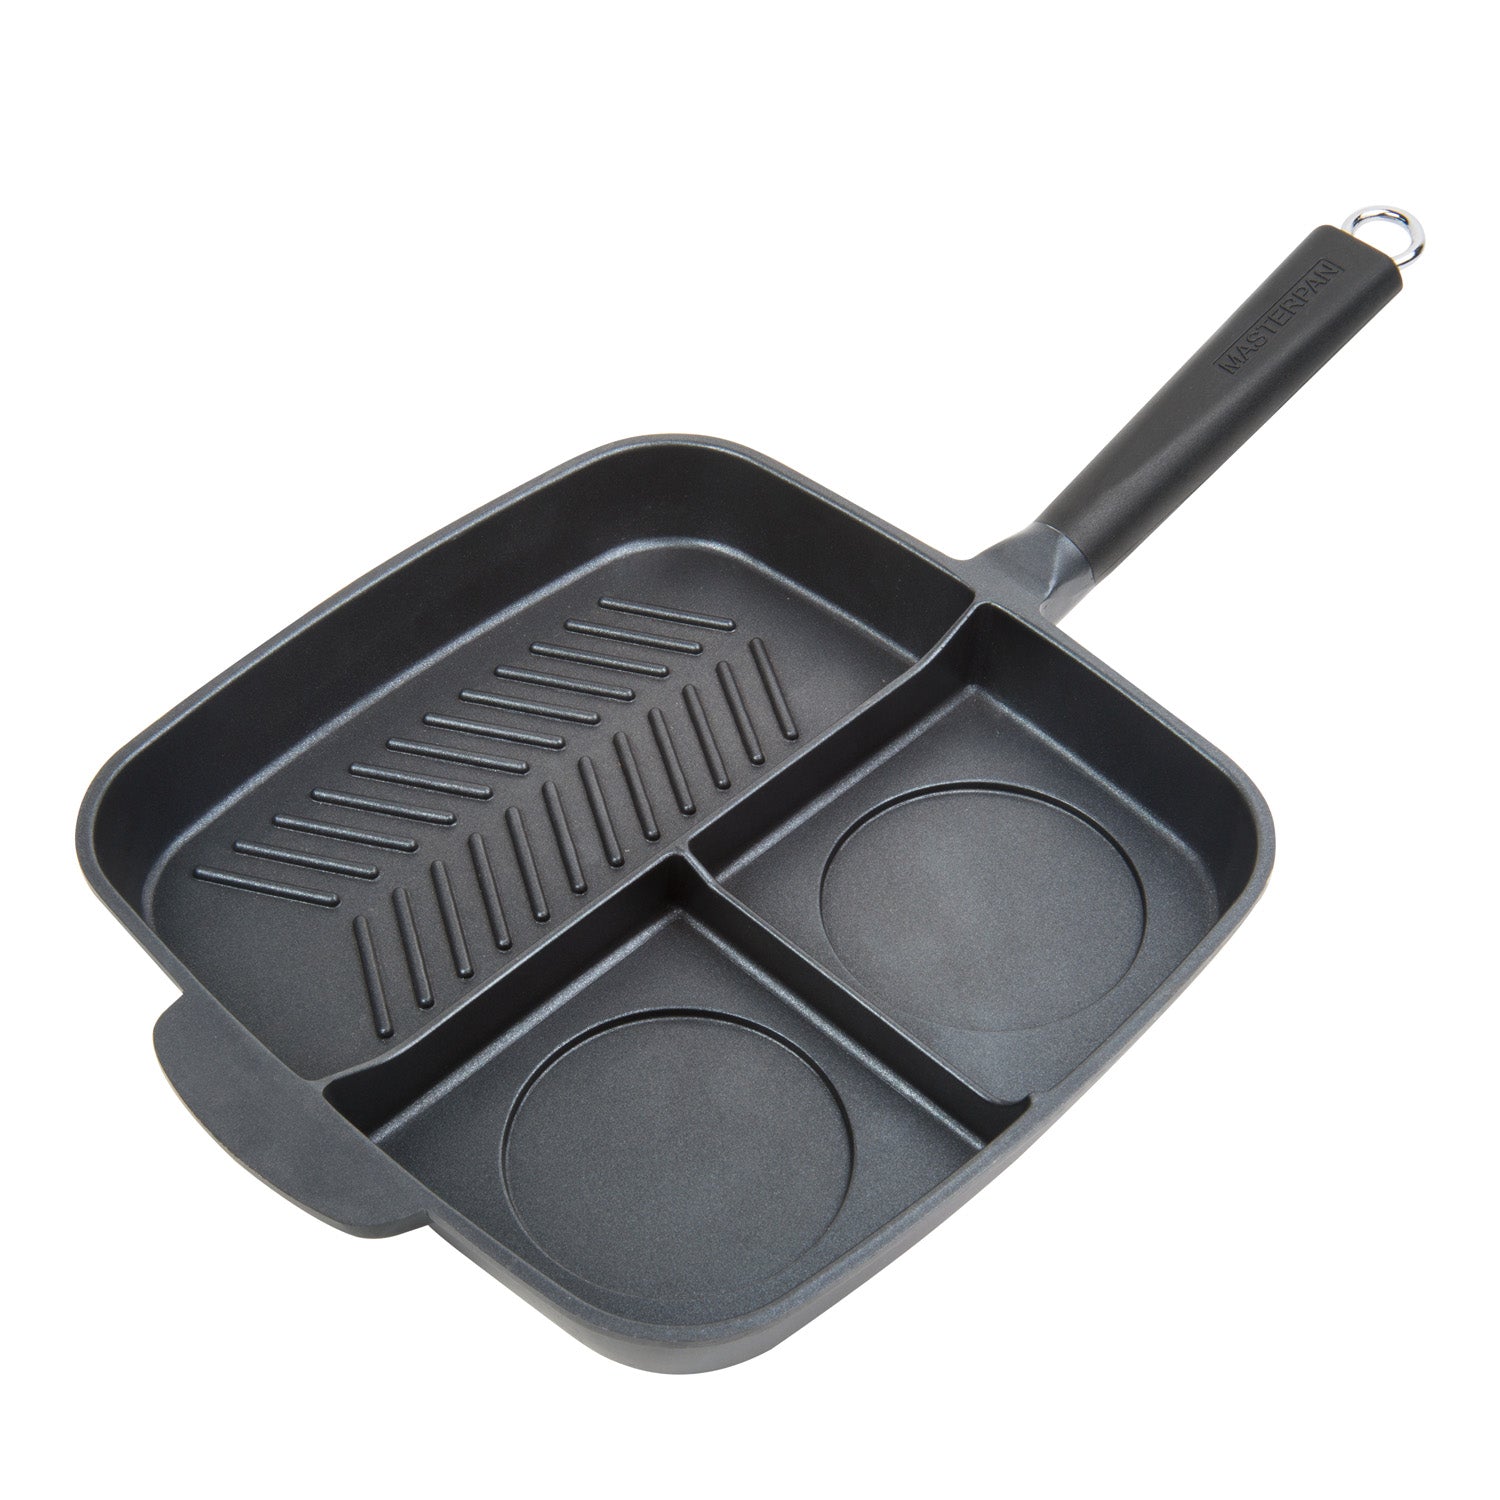 Products 3-SECTION NON-STICK CAST ALUMINUM GRILL & GRIDDLE SKILLET WITH BAKELITE HANDLE, 11